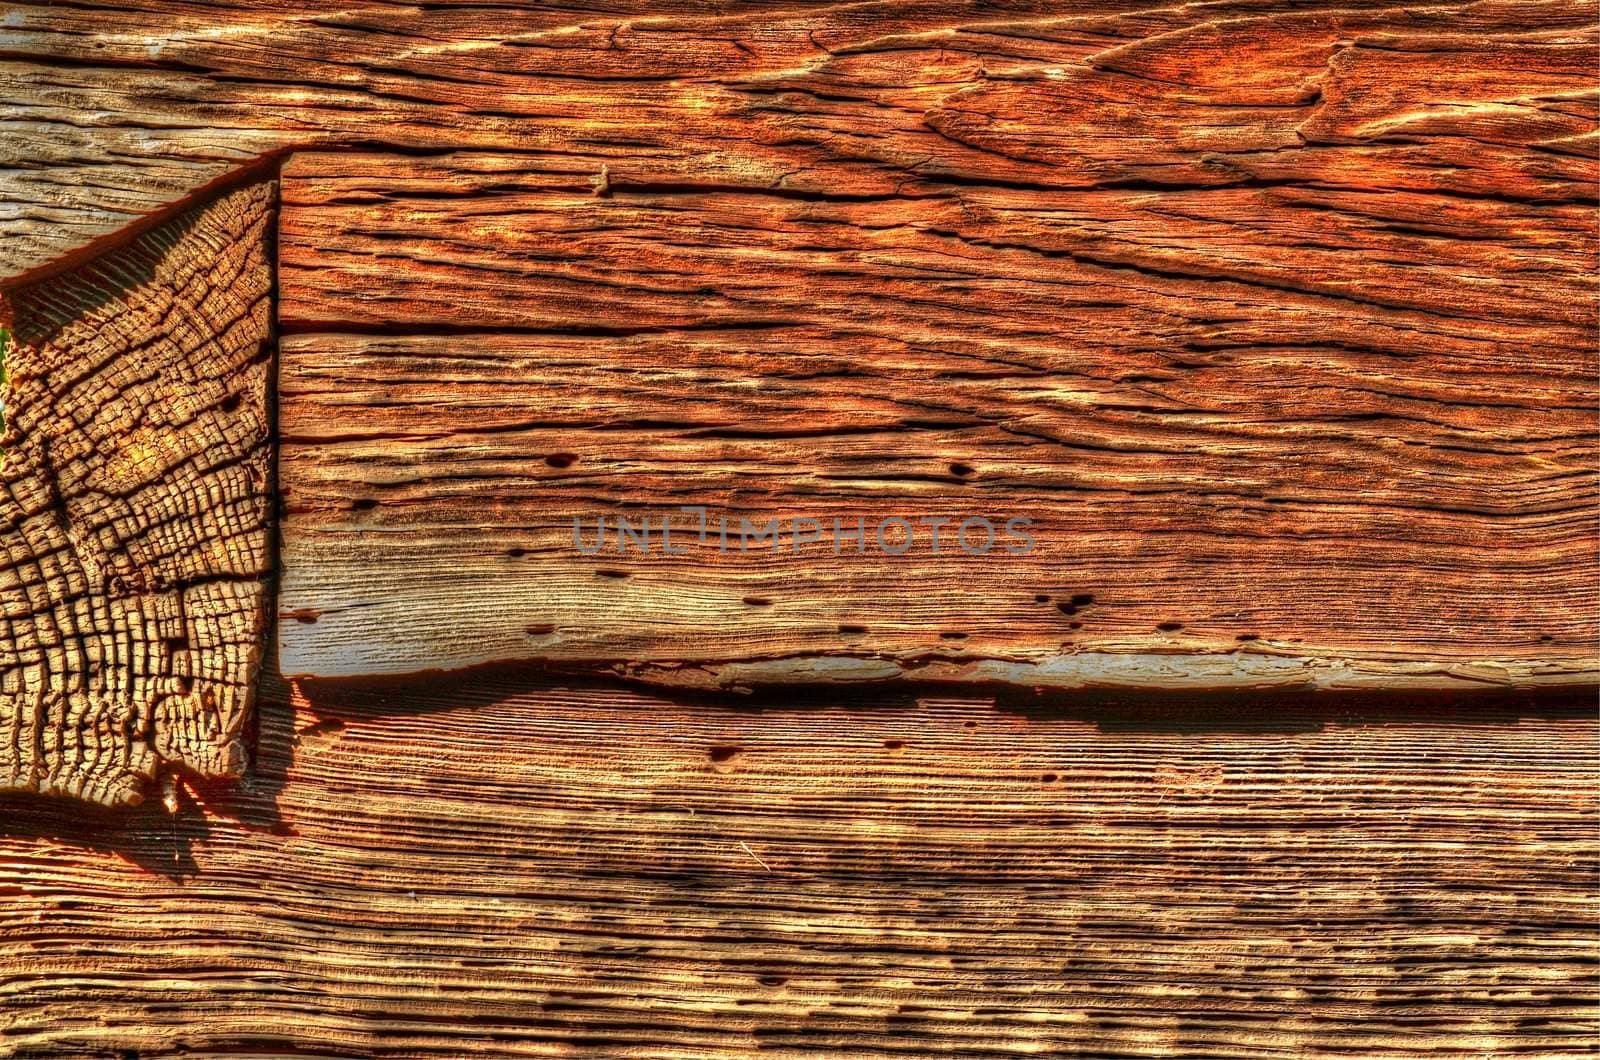 A fragment of a wooden structure of the building by PRSchreyner